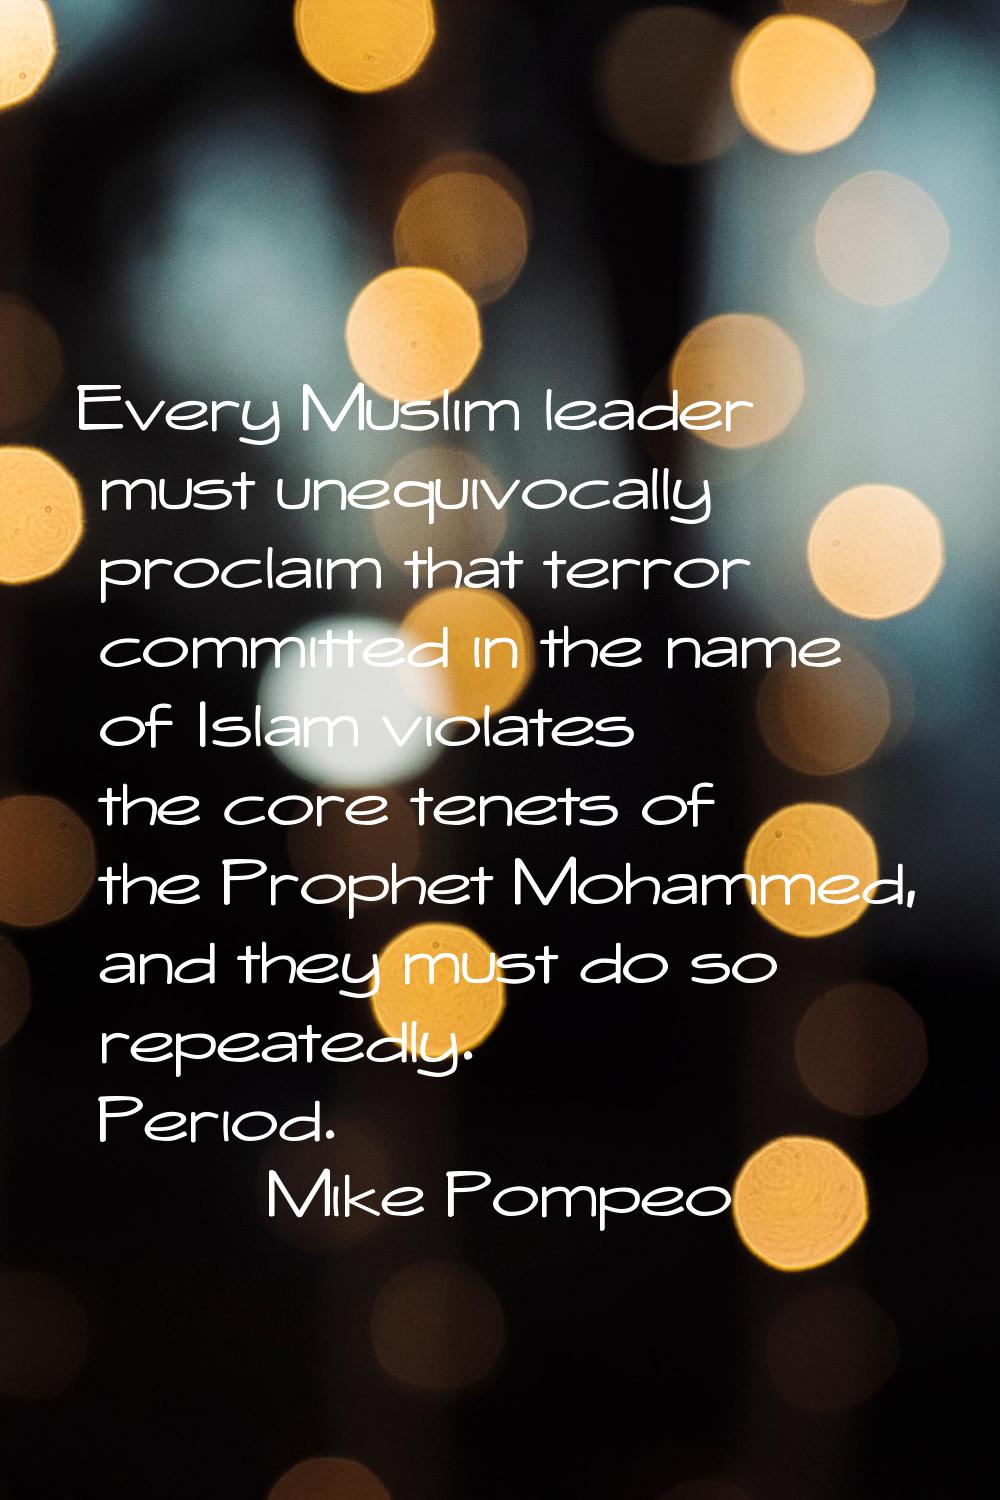 Every Muslim leader must unequivocally proclaim that terror committed in the name of Islam violates